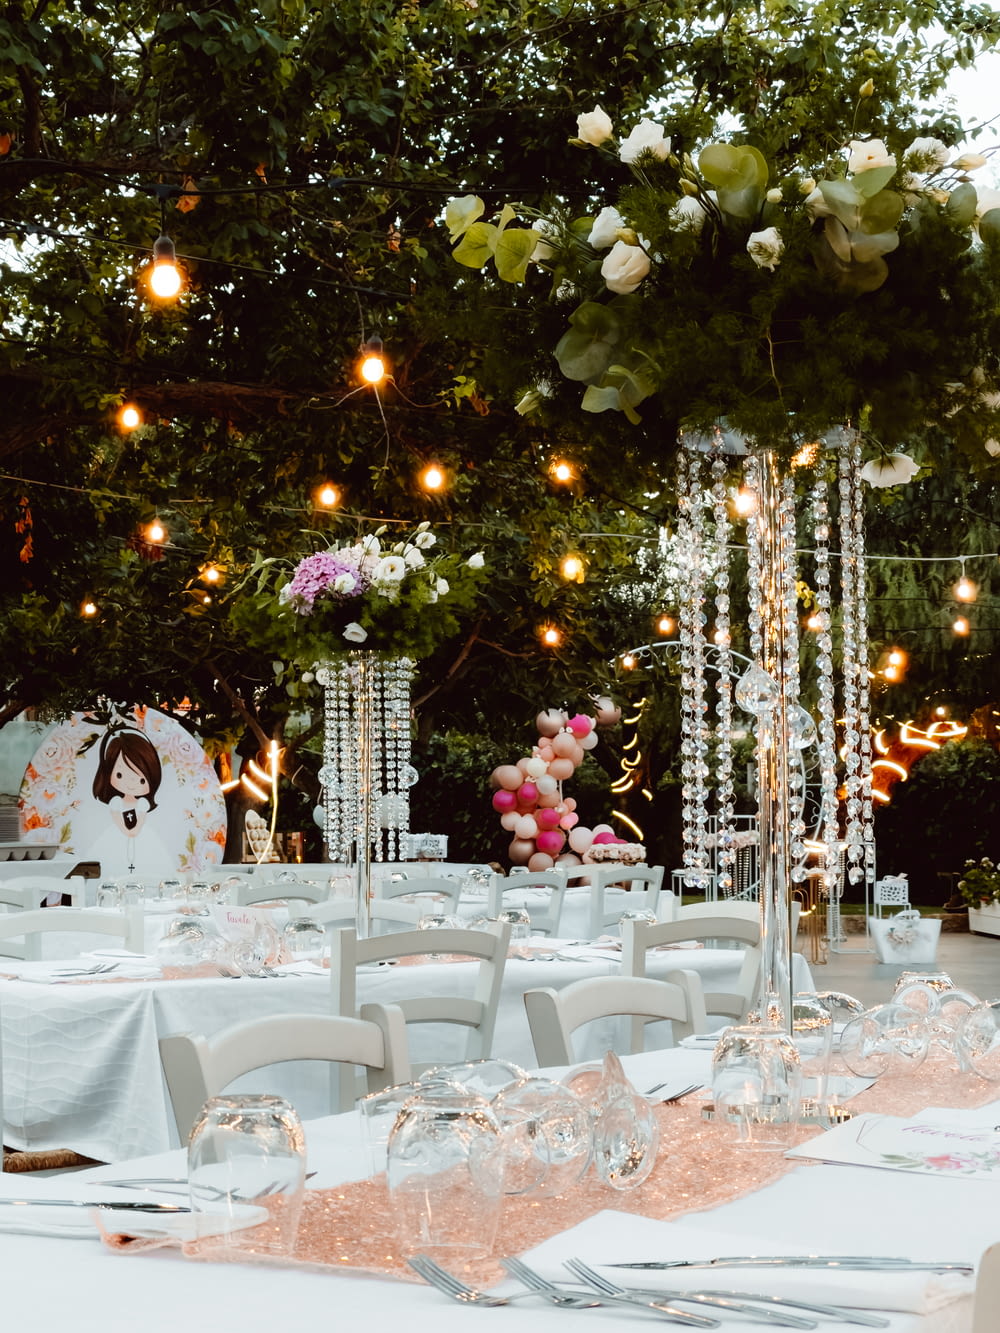 a table with white tables and chairs under a tree with lights